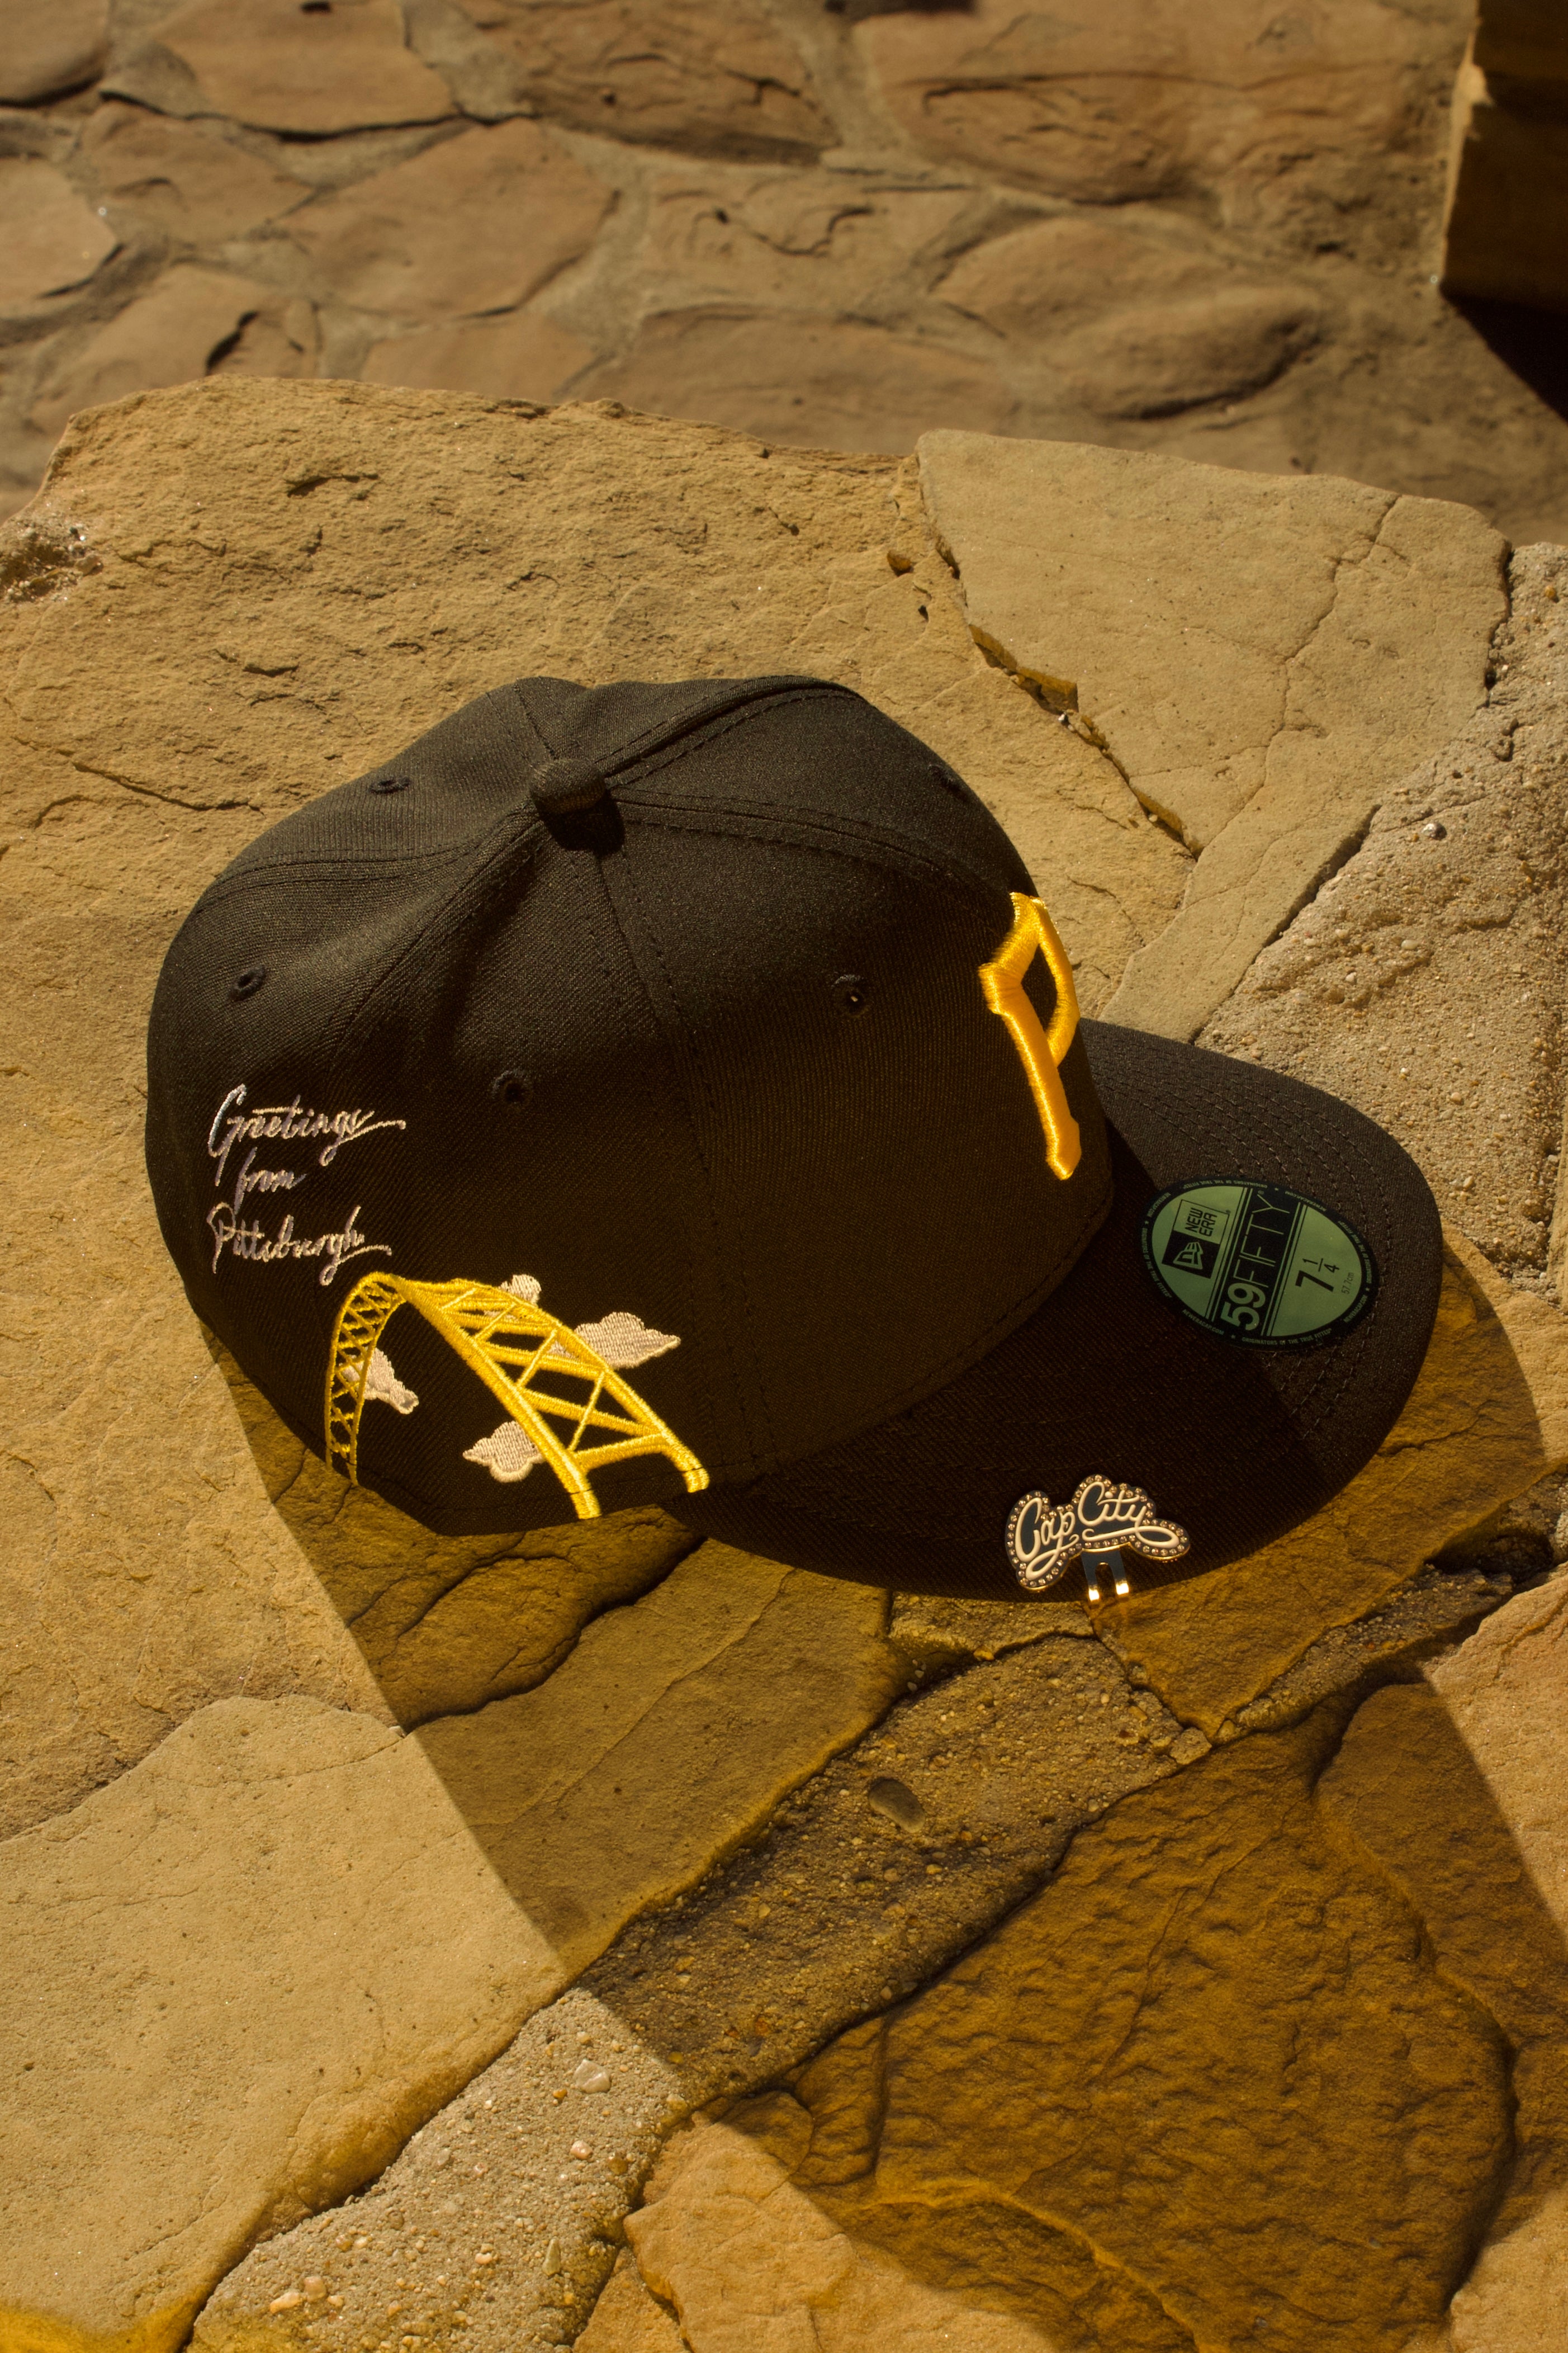 NEW ERA EXCLUSIVE 59FIFTY BLACK PITTSBURGH PIRATES W/ "GREETINGS FROM PITTSBURGH" PATCH